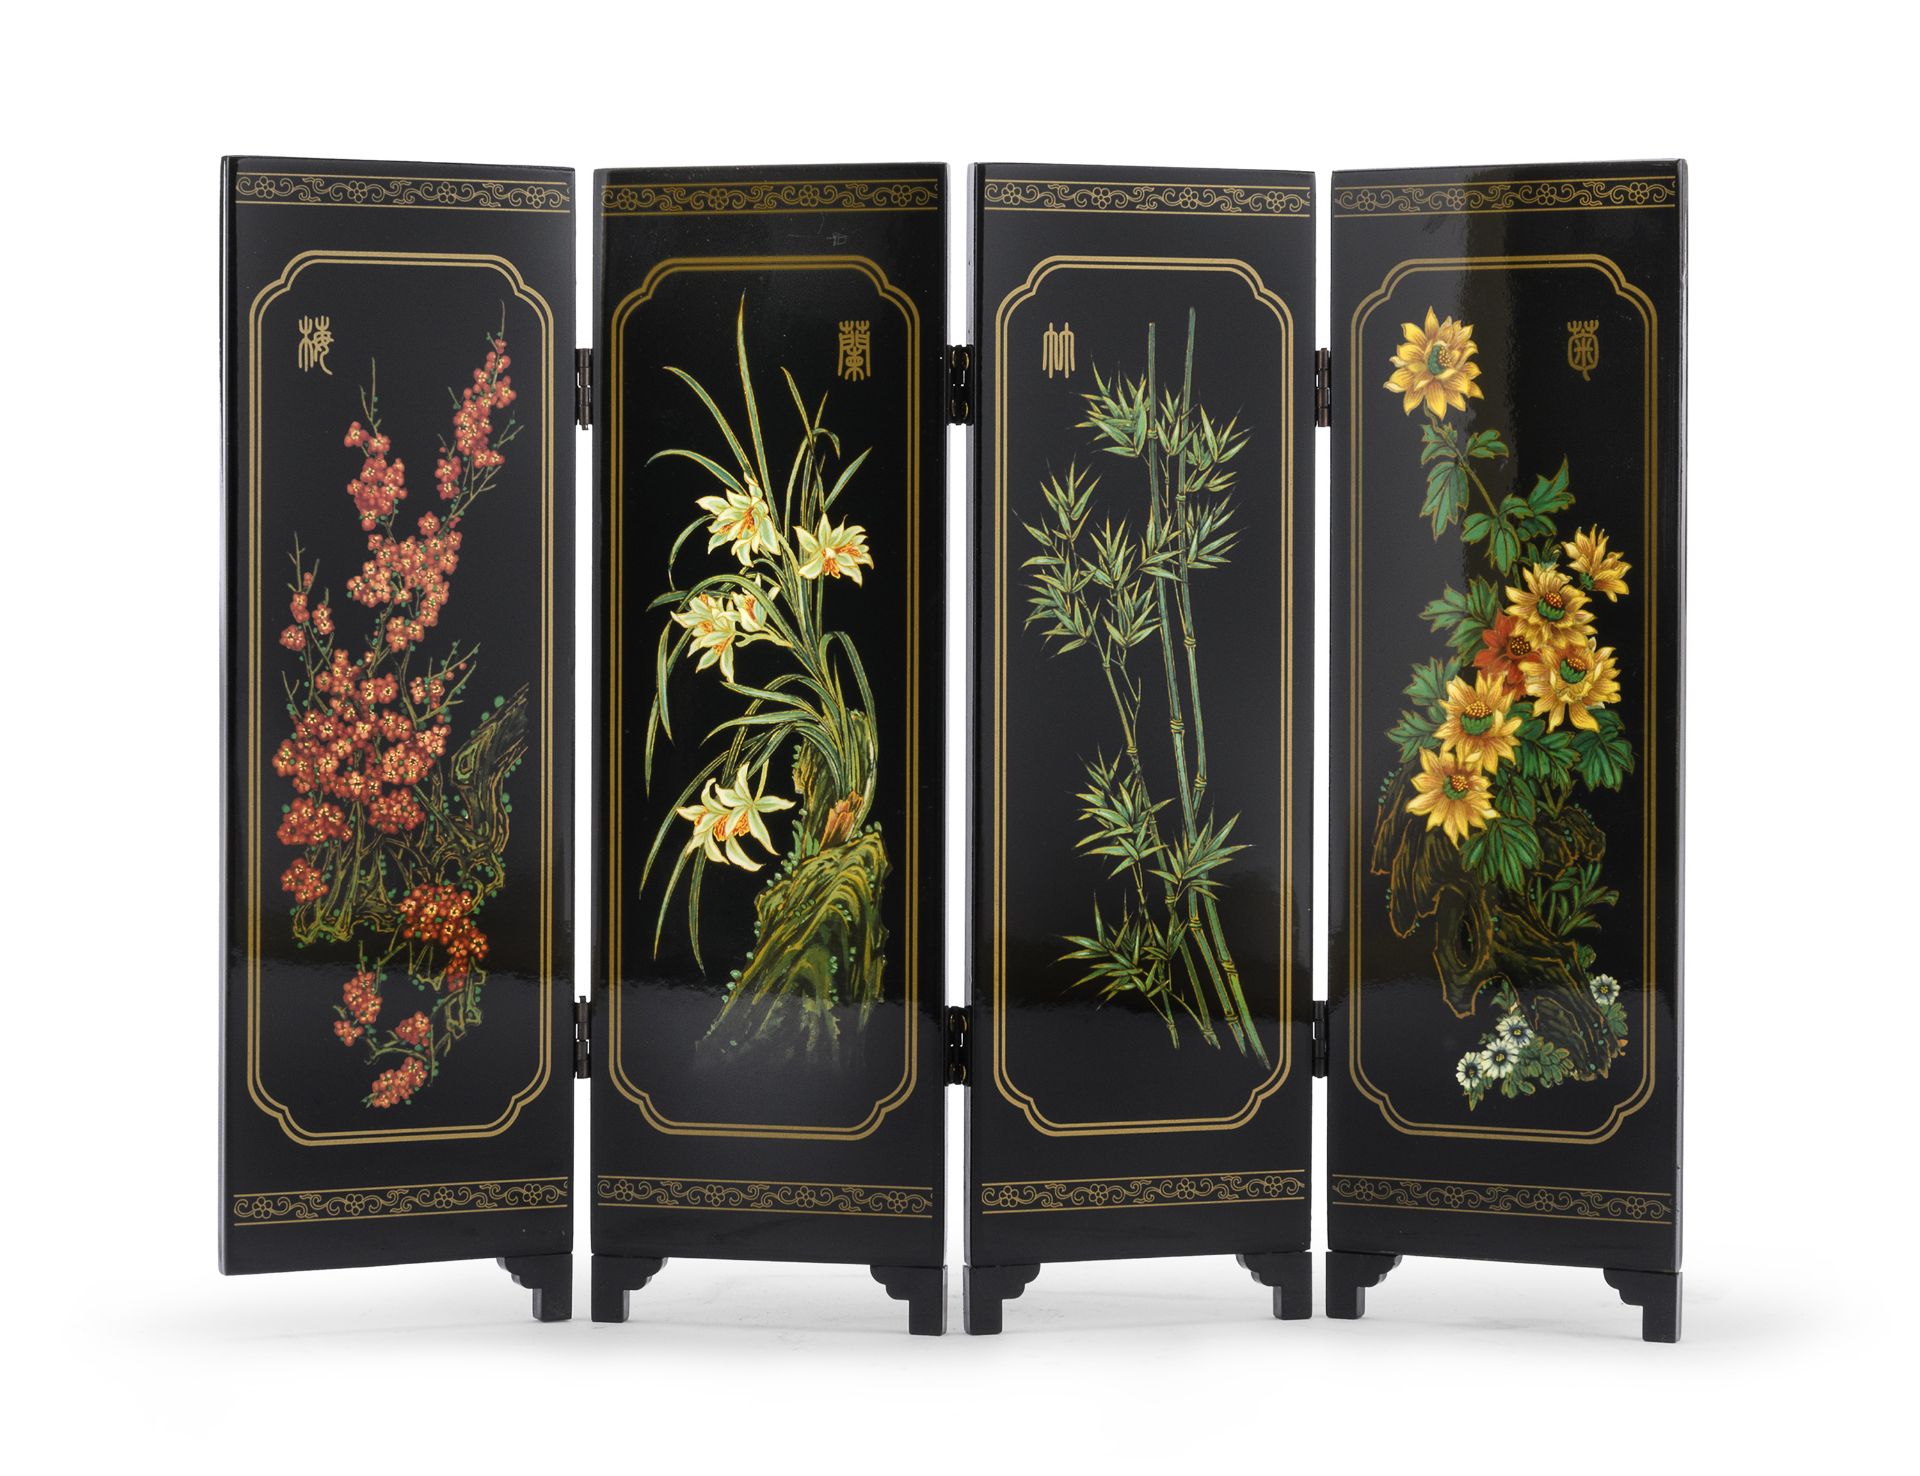 A CHINESE BLACK LACQUER TABLE SCREEN 20TH CENTURY